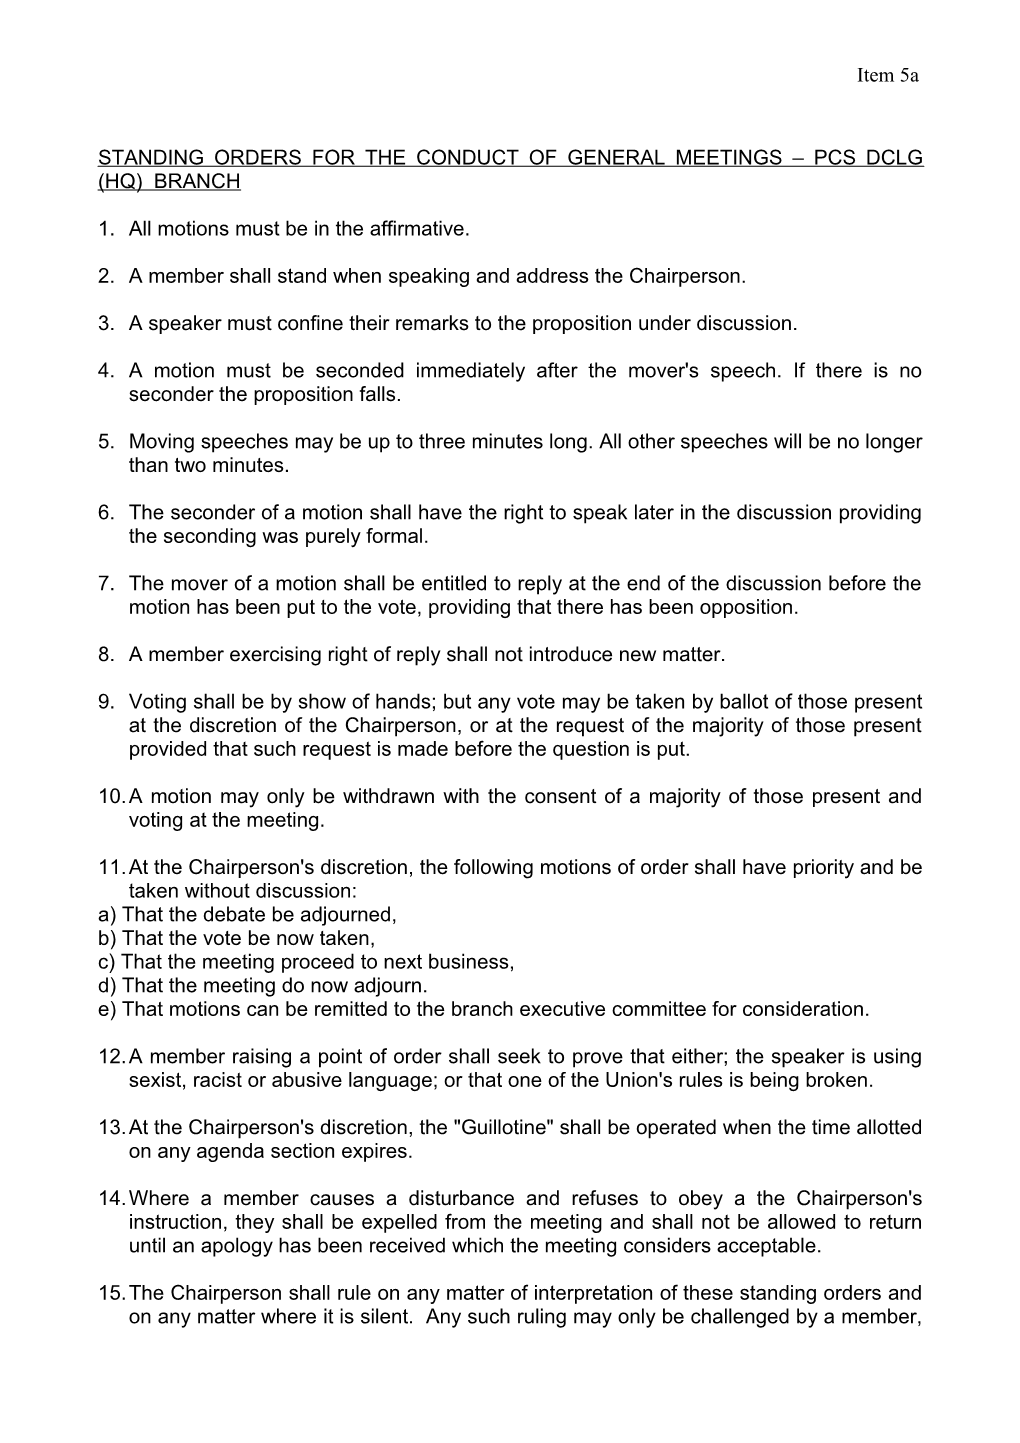 Standing Orders for the Conduct of General Meetings - Pcs Detr London Branch